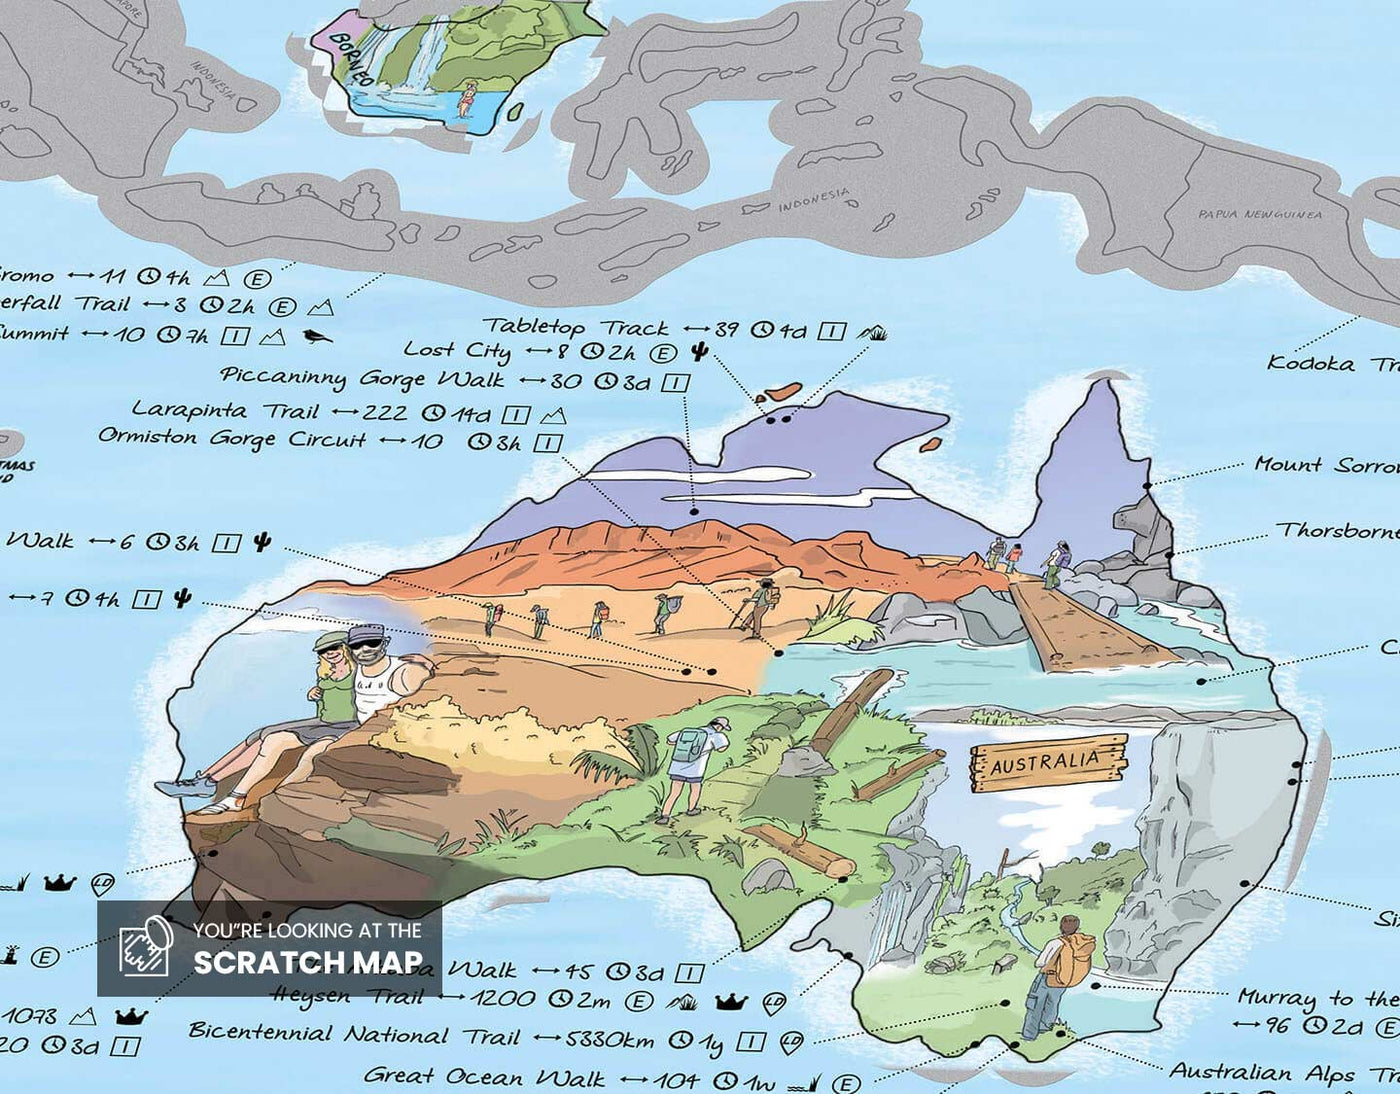 image of scratchmap for adventures